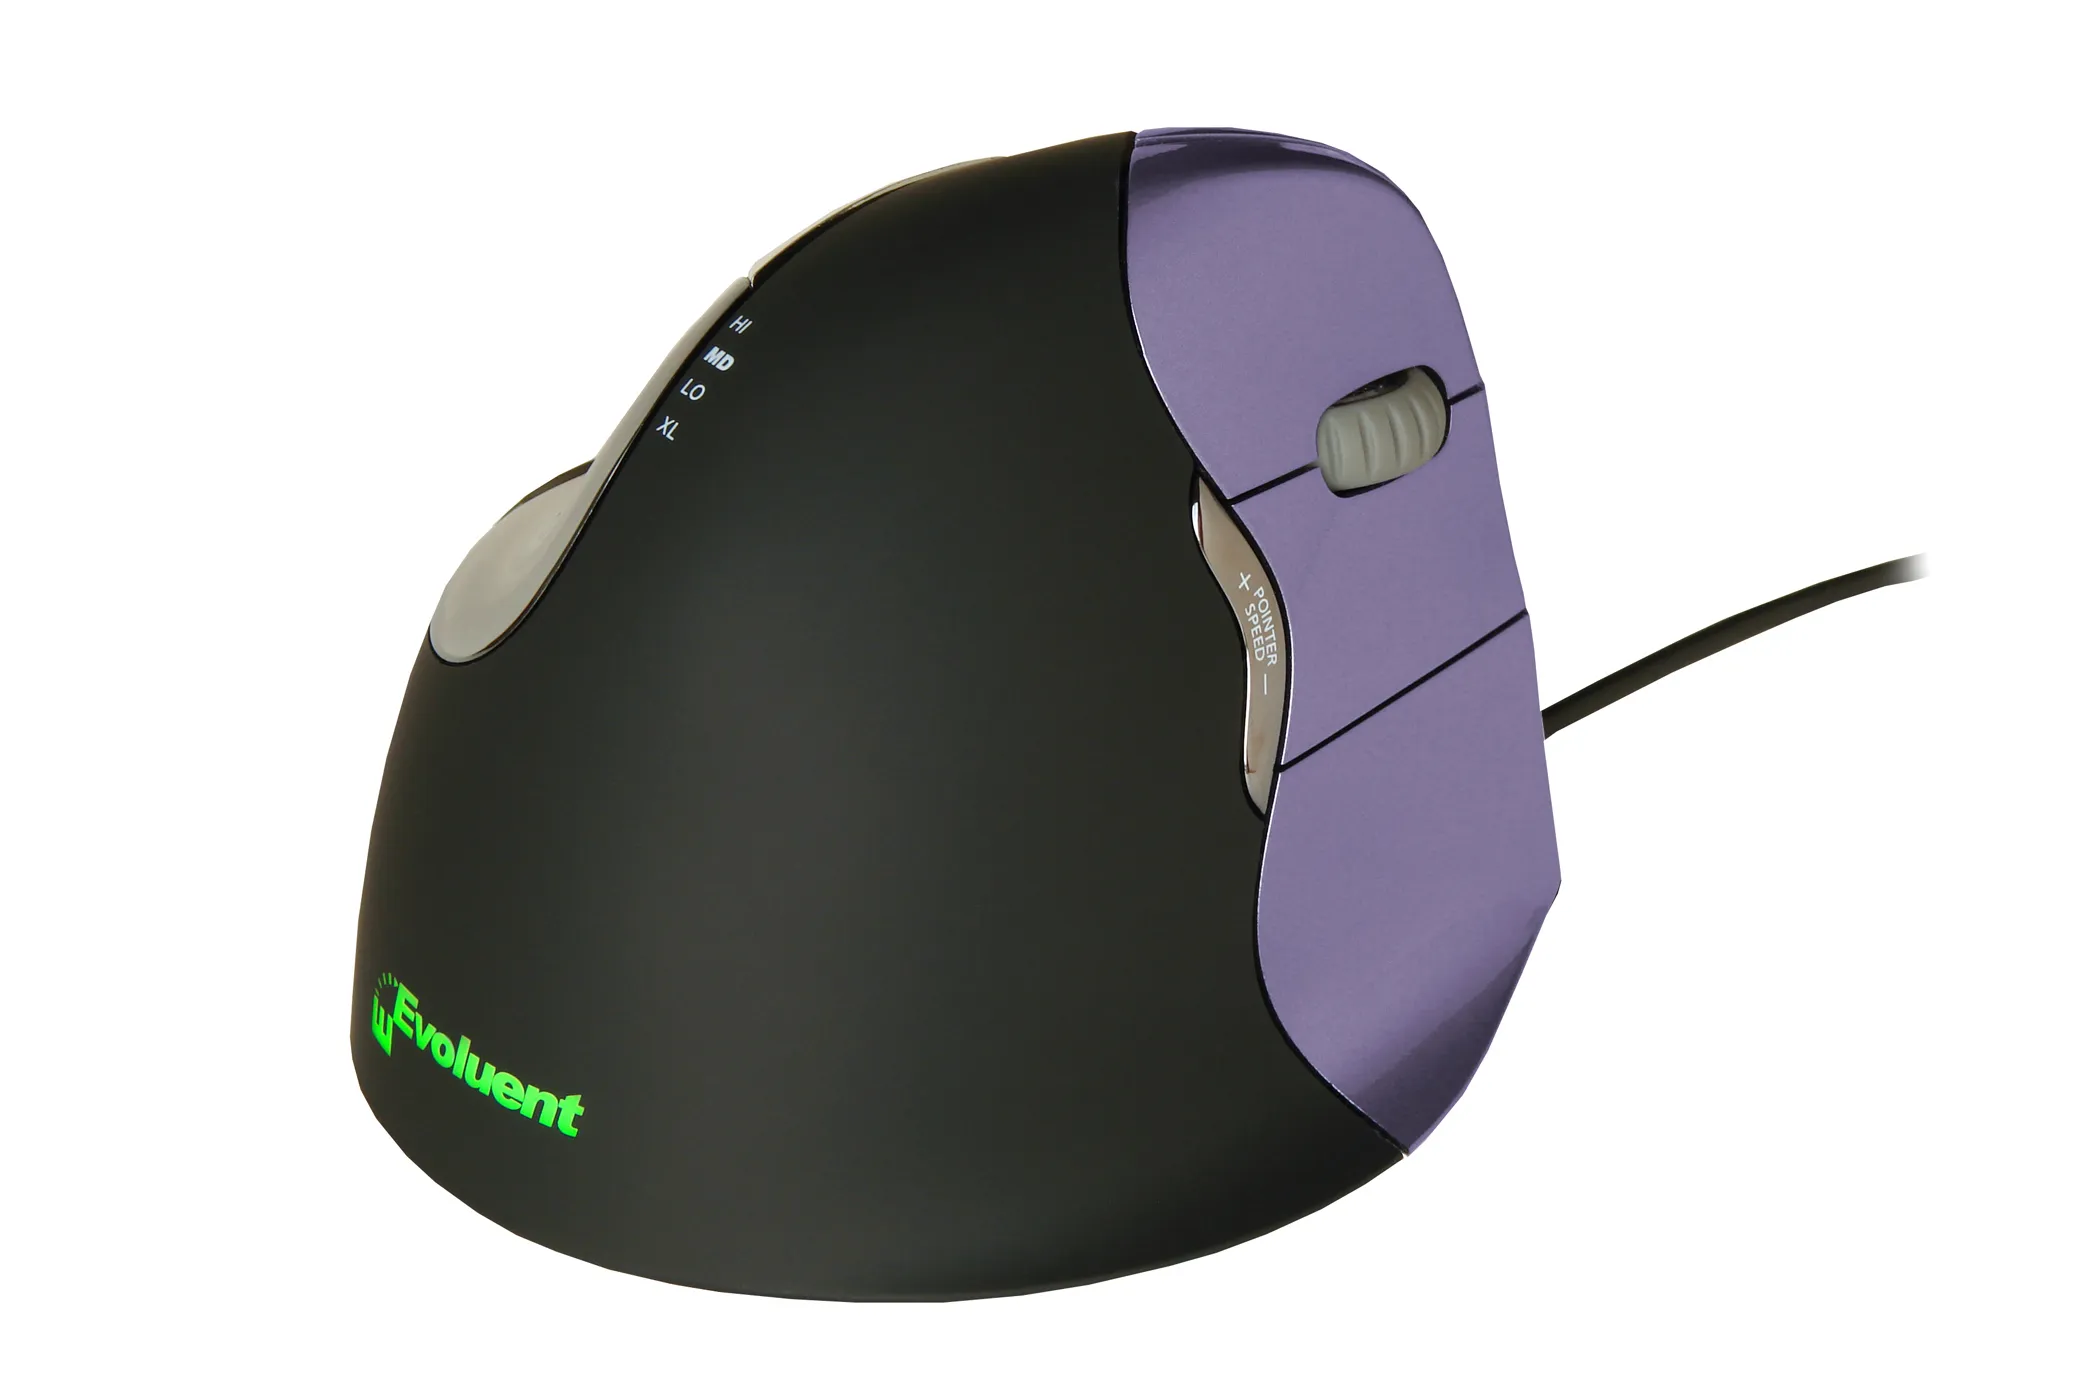 Achat Souris BakkerElkhuizen Evoluent4 Mouse Small (Right Hand